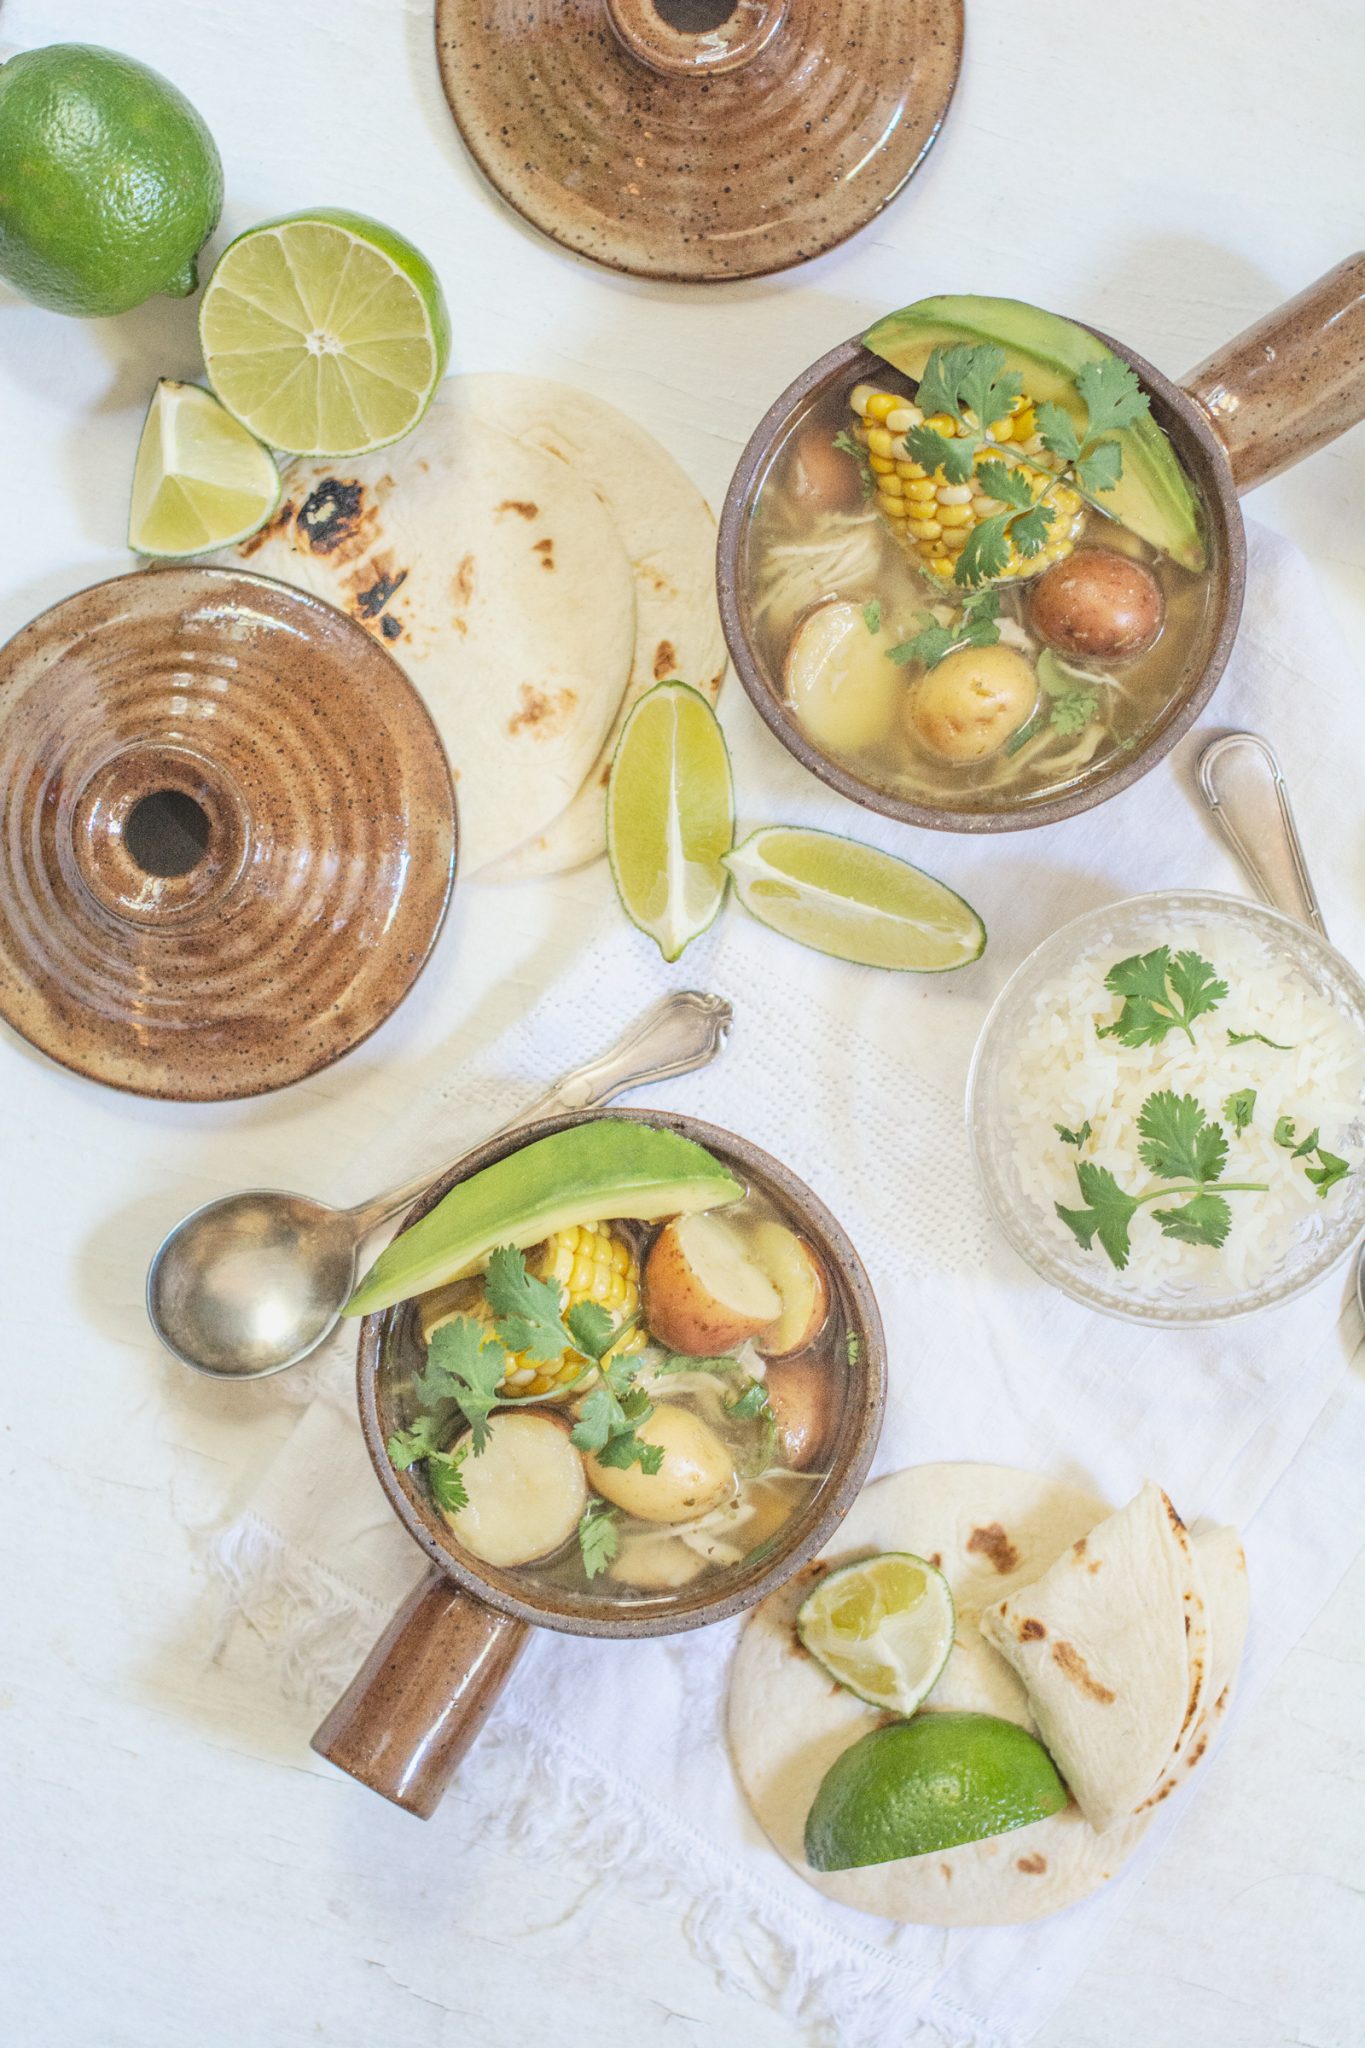 Ajiaco recipe; Colombian Chicken Corn and Potato Stew served on a white table with tortillas, limes and bowls of rice.